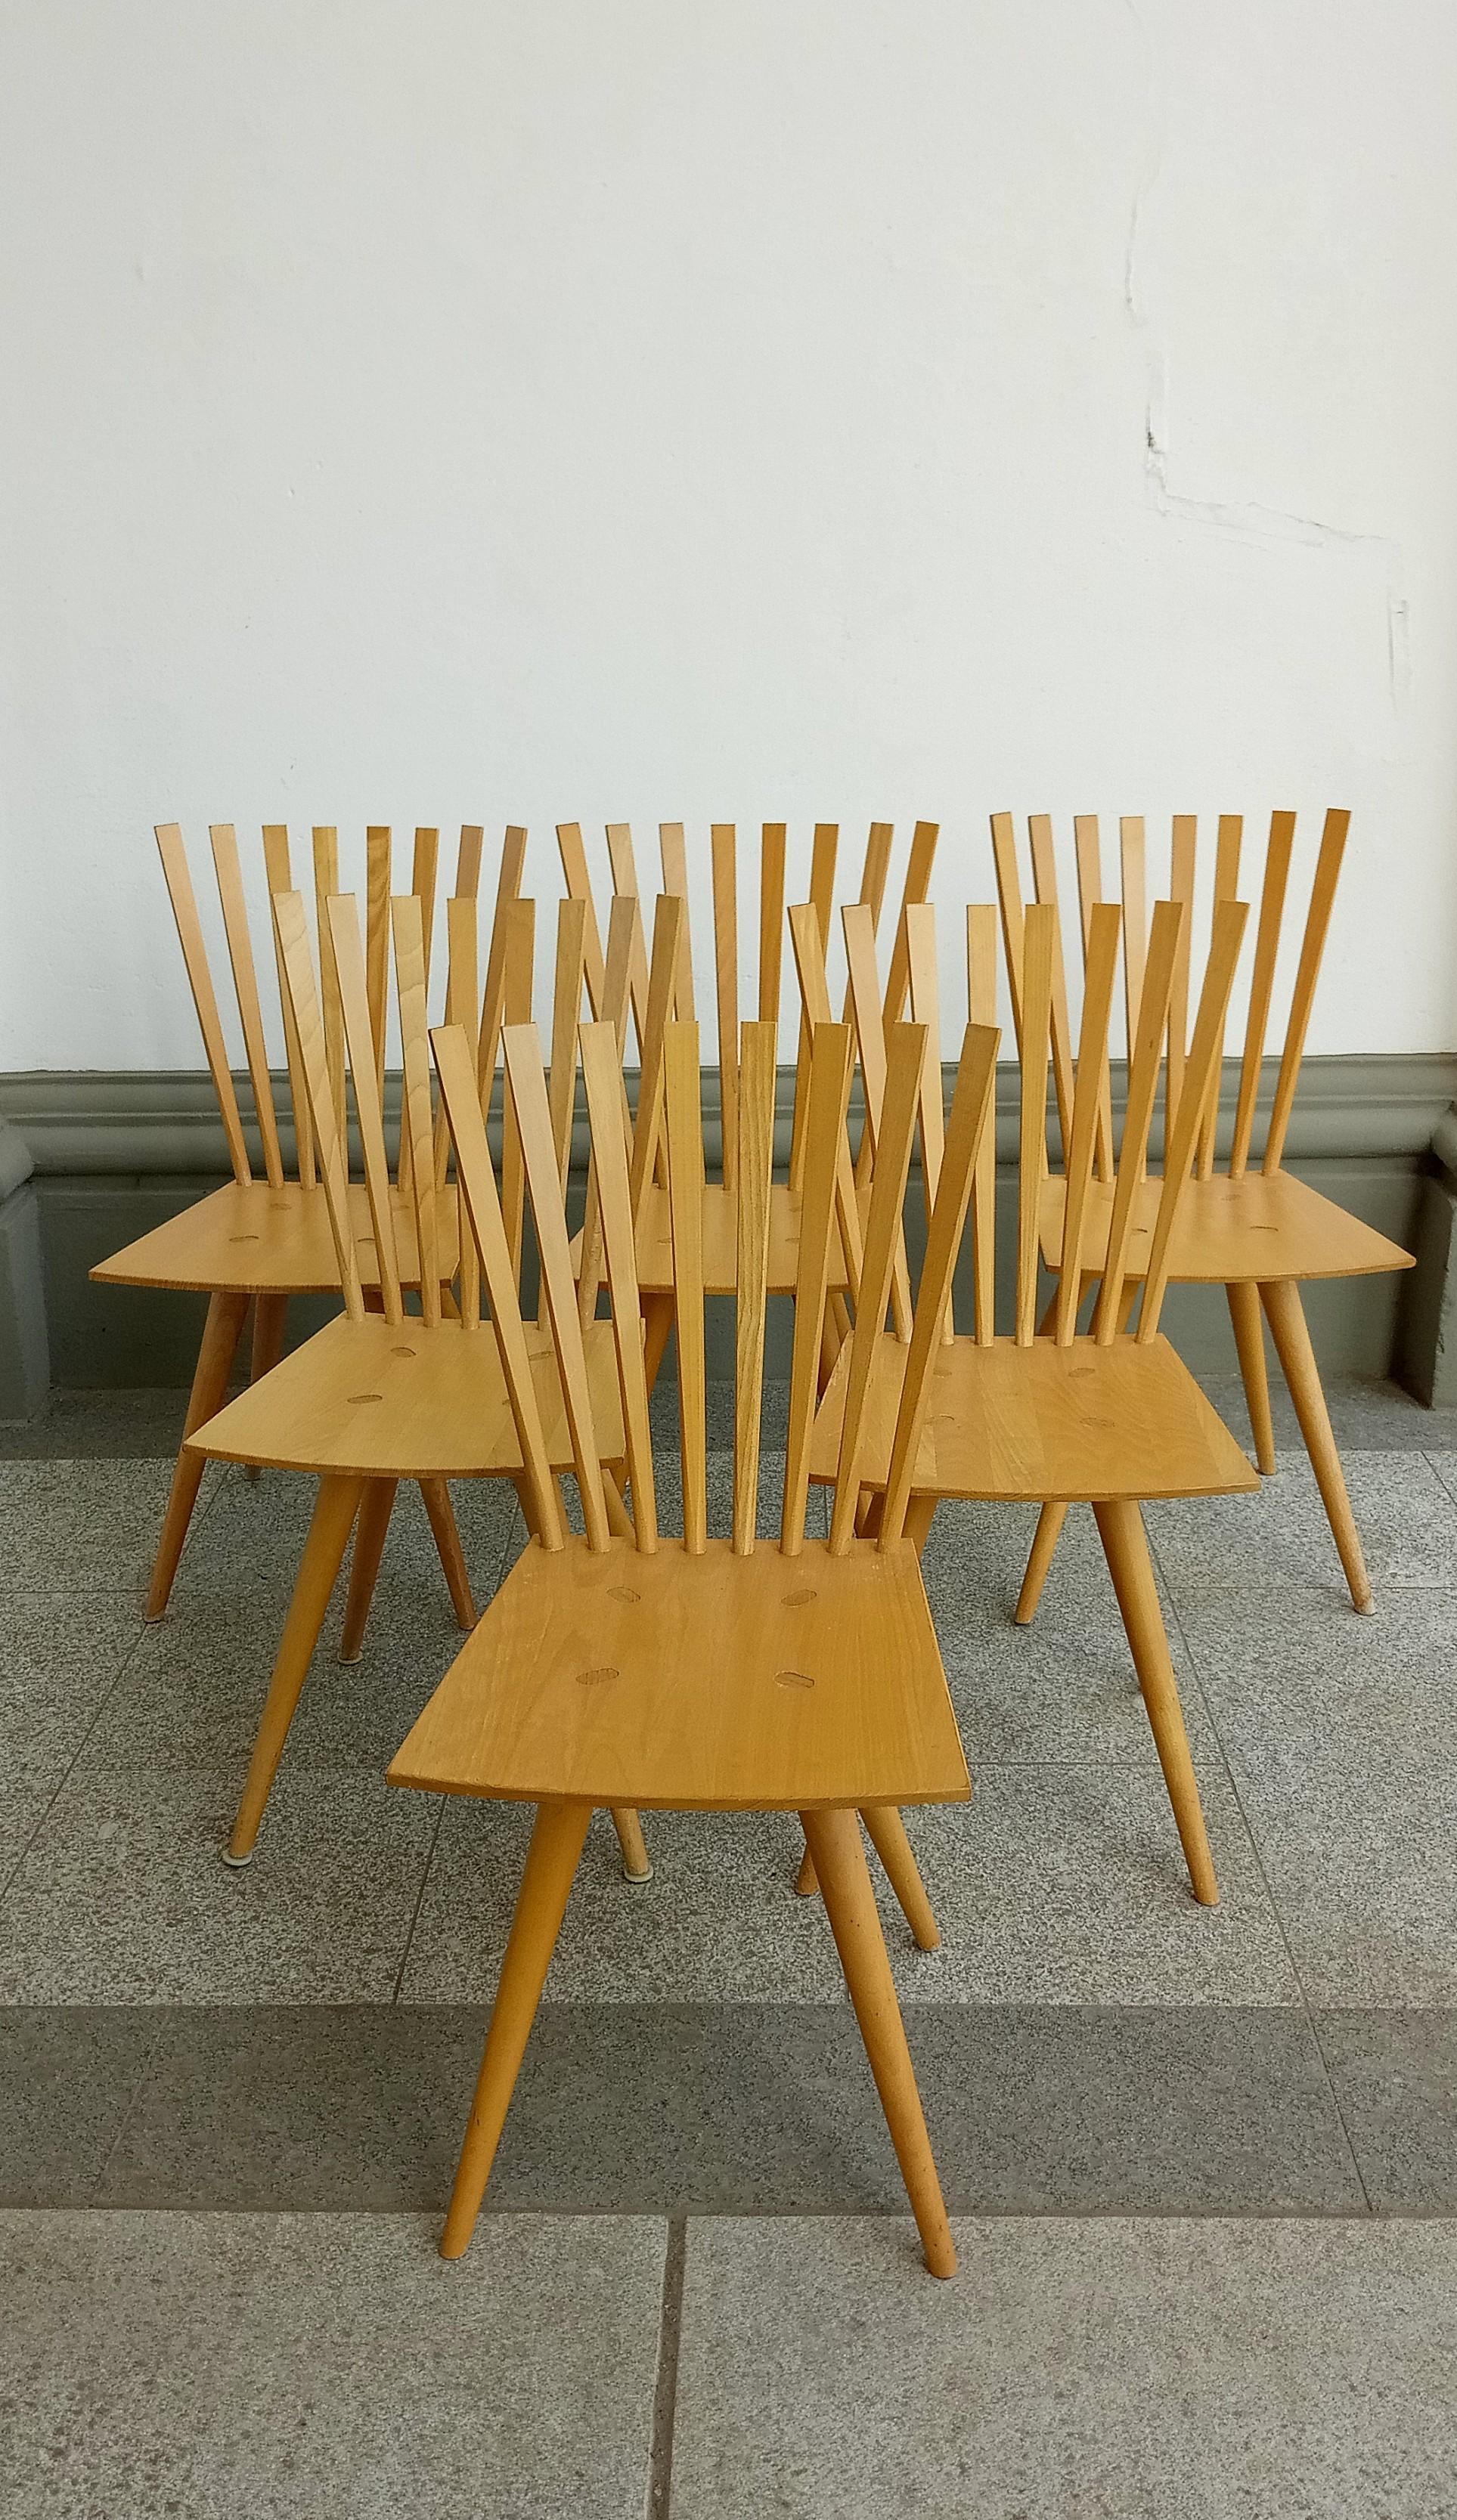 a set of six sculptural chairs by Foersom & Hiort_Lorenenzen for Fredericia
in used condition. Some chairs have small spots on it.